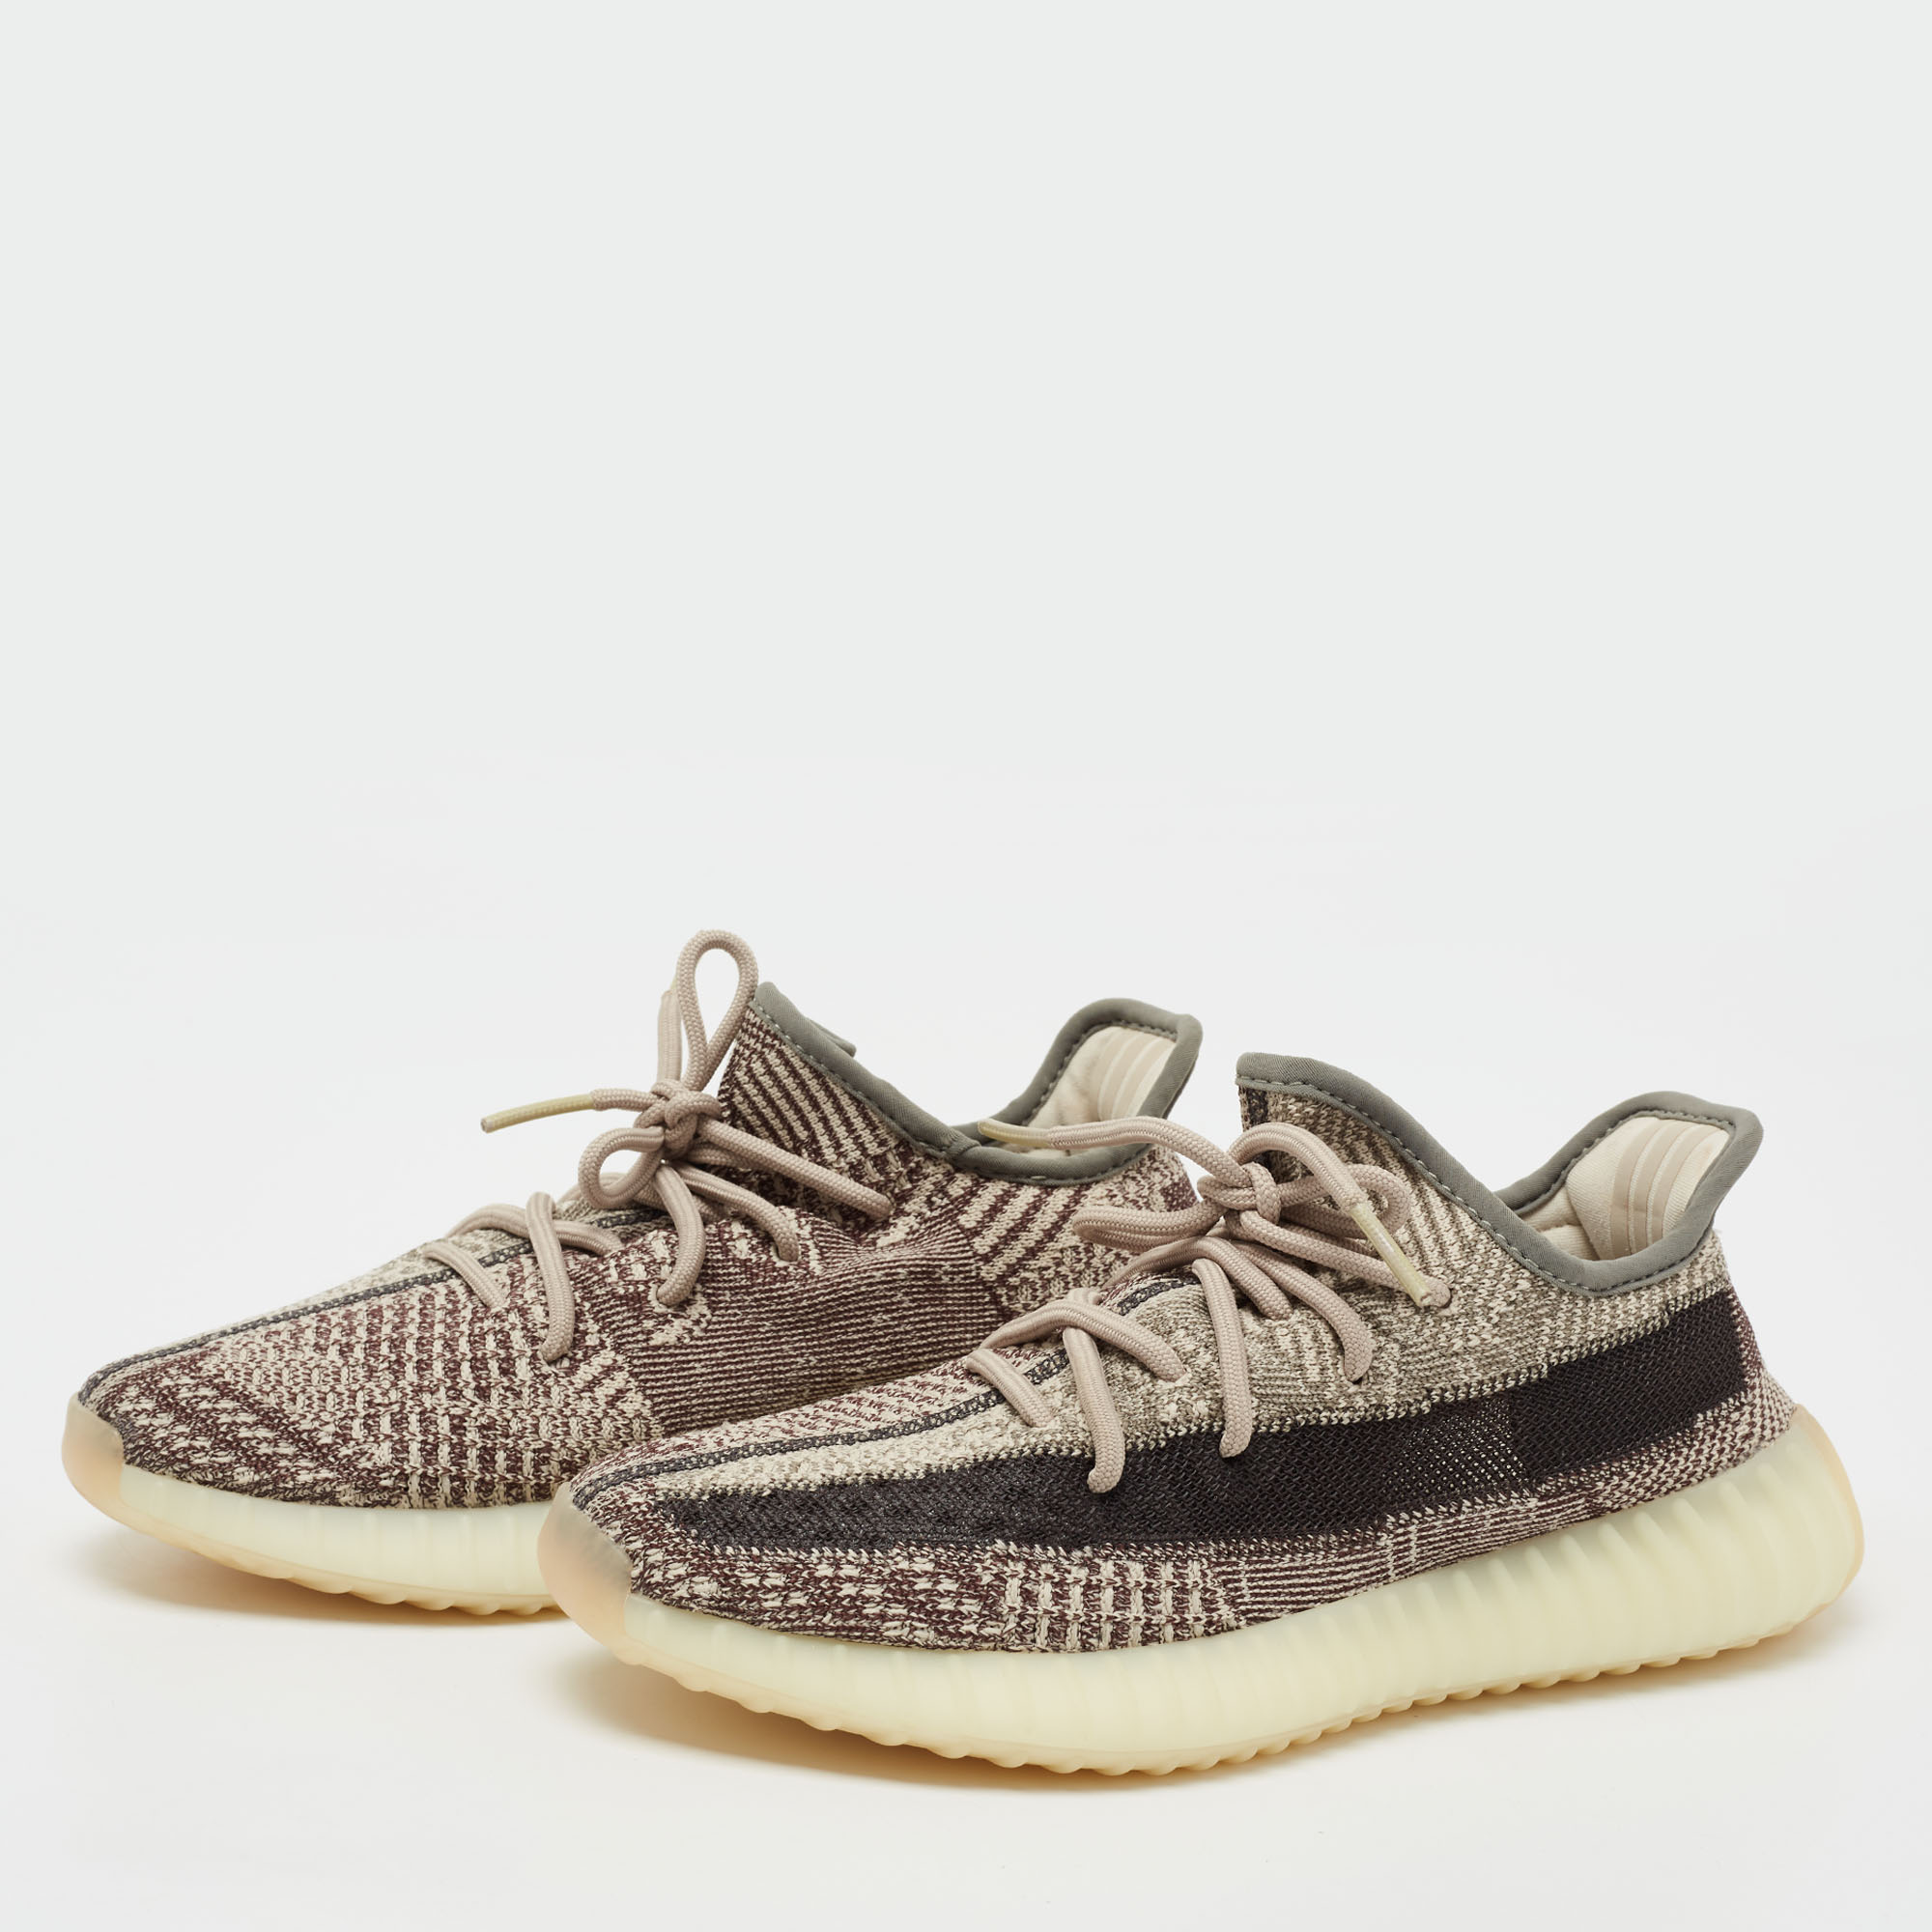 

Yeezy x Adidas Brown Knit Fabric Boost 350 V2 Zyon Low-Top Sneakers Size 39 1/3